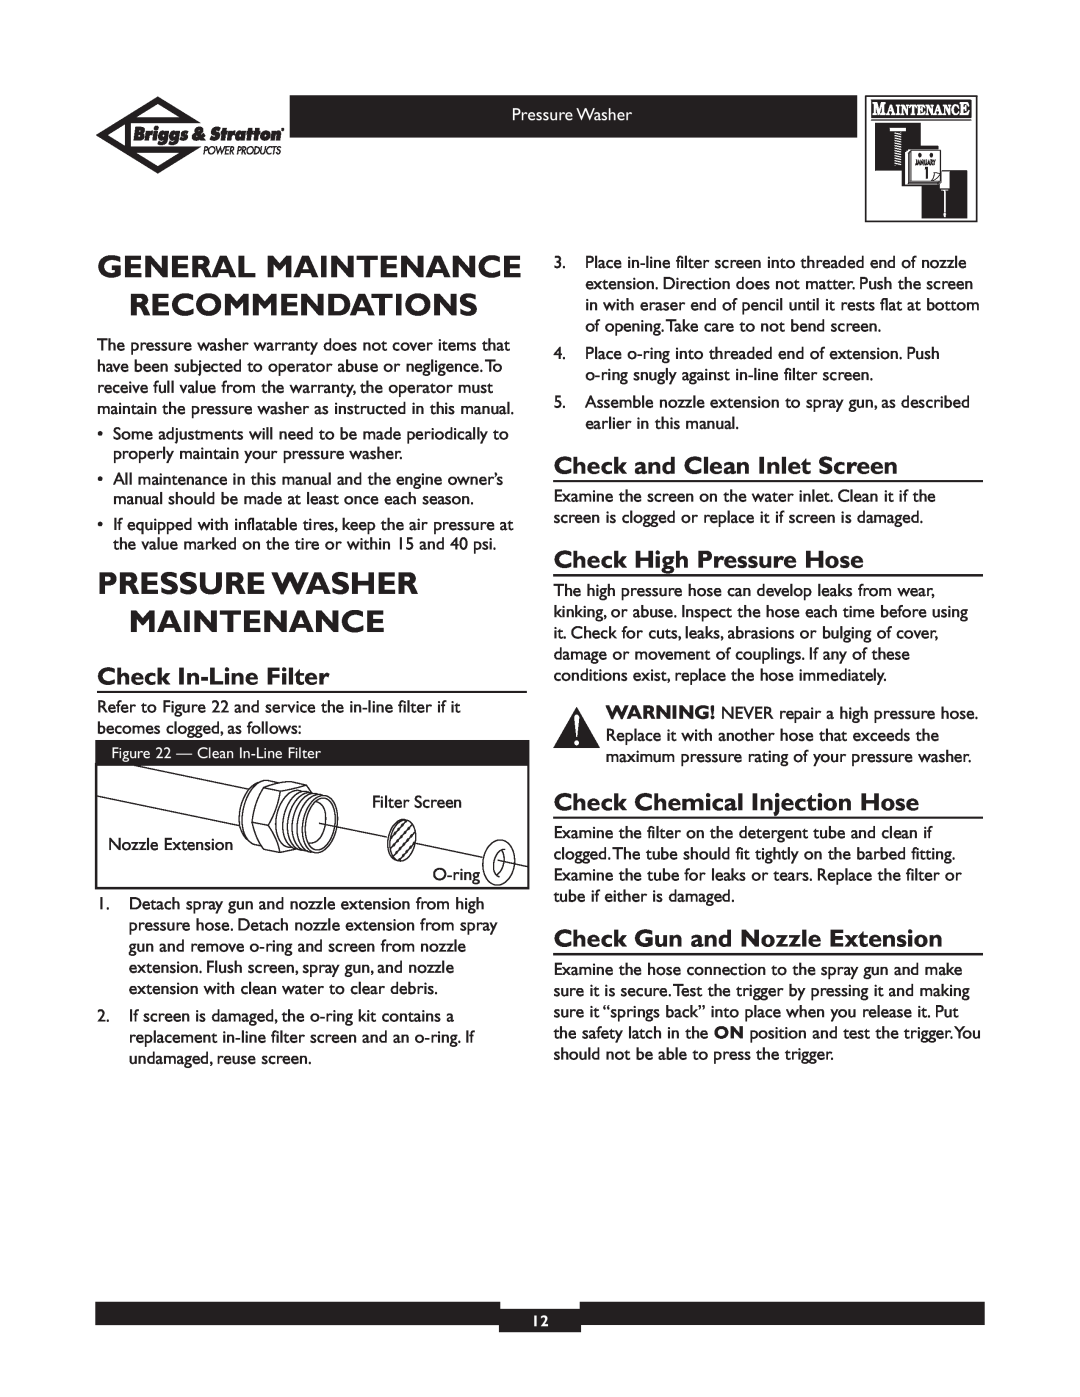 Briggs & Stratton 01805, 01806 General Maintenance Recommendations, Pressure Washer Maintenance, Check In-Line Filter 